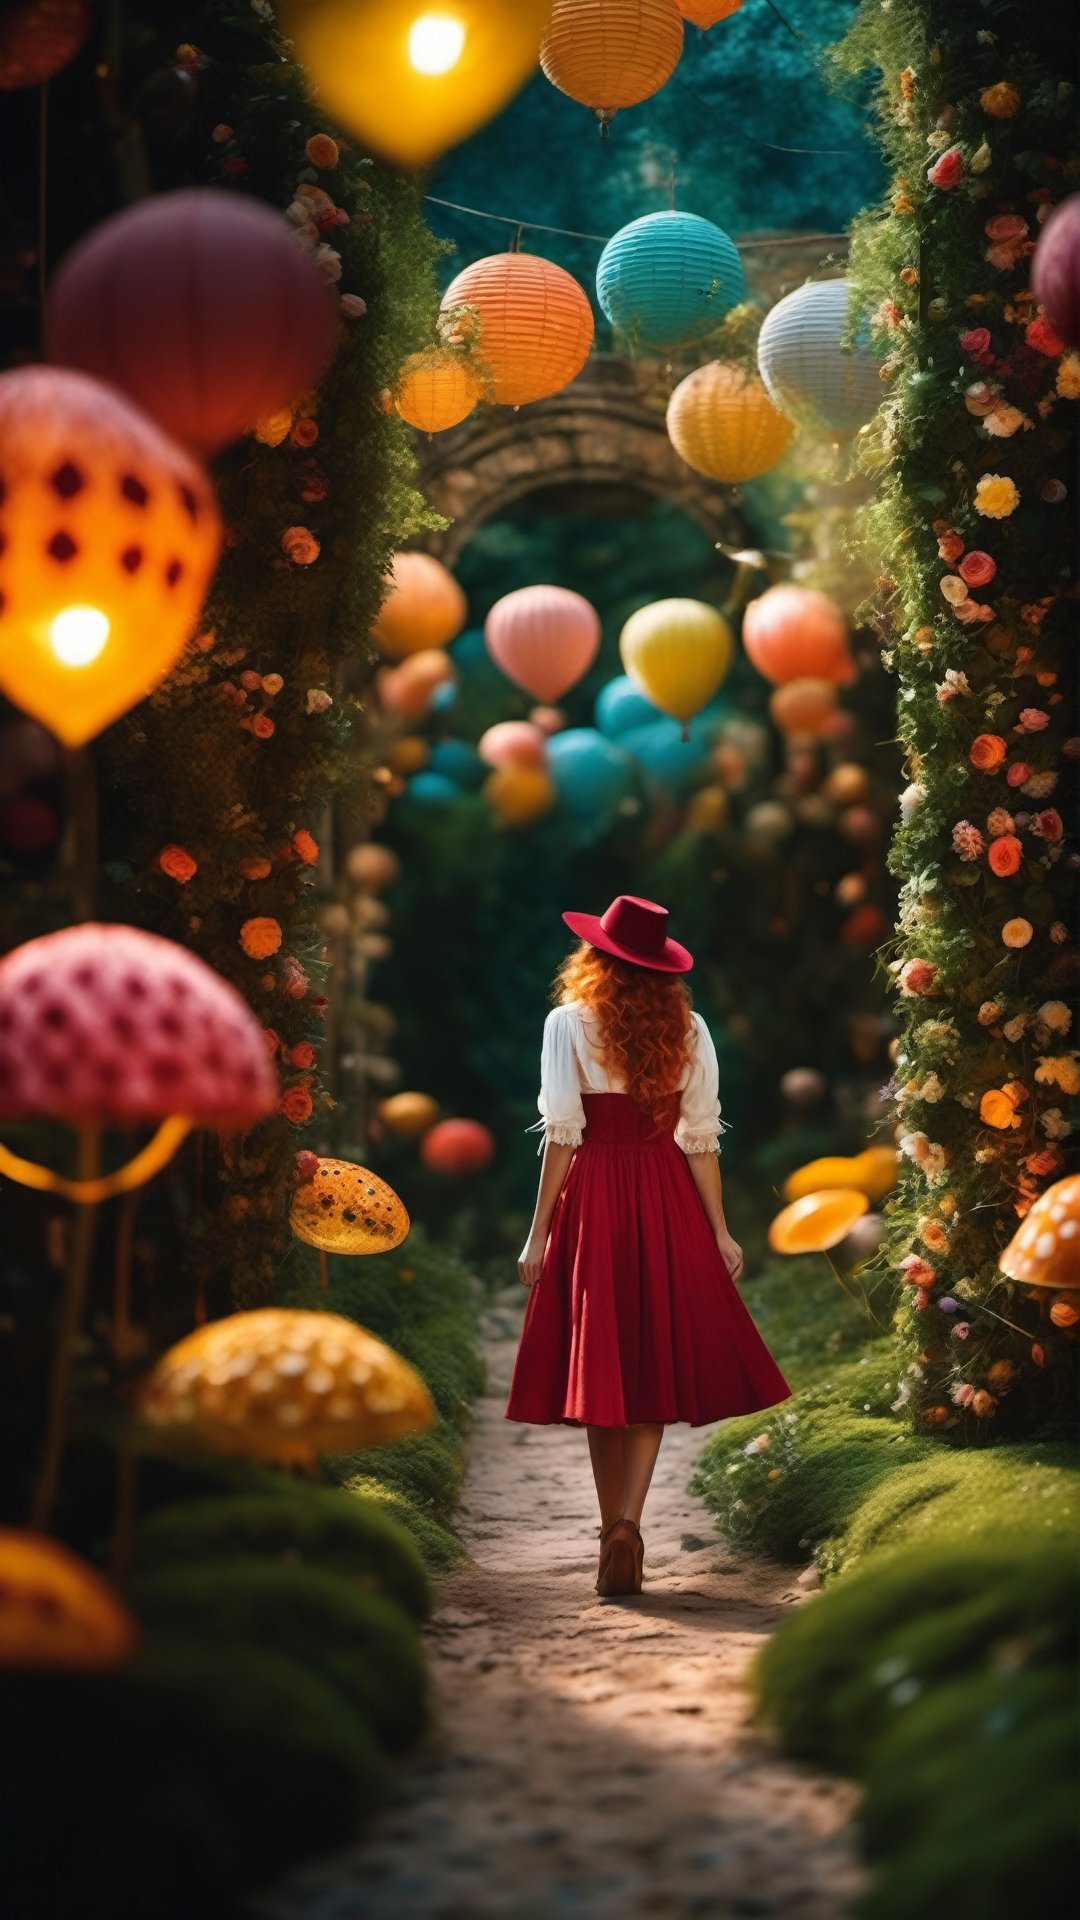 cinematic photo Arcane,  Abdul Djalil Pirous, 1girl, Alice in Wonderland, redhead, wandering in Enchanted Garden, beautiful,  whimsical wonderland with oversized flowers, talking animals, hidden pathways, swirling lights:1.2, light particles:0.9,life-like, Incorporates vibrant colors, unusual plant arrangements, and fantastical creatures, texture, masterpiece, great art, high quality, best quality, highly detailed, 8k, wide shot, panorama, (Bottom view:1.1), Kodachrome,1970s,(8k, RAW photo, highest quality), eye focus, close up,sharp focus,(detailed eyes:0.8), (masterpiece,best quality:1.5) . 35mm photograph, film, bokeh, professional, 4k, highly detailed